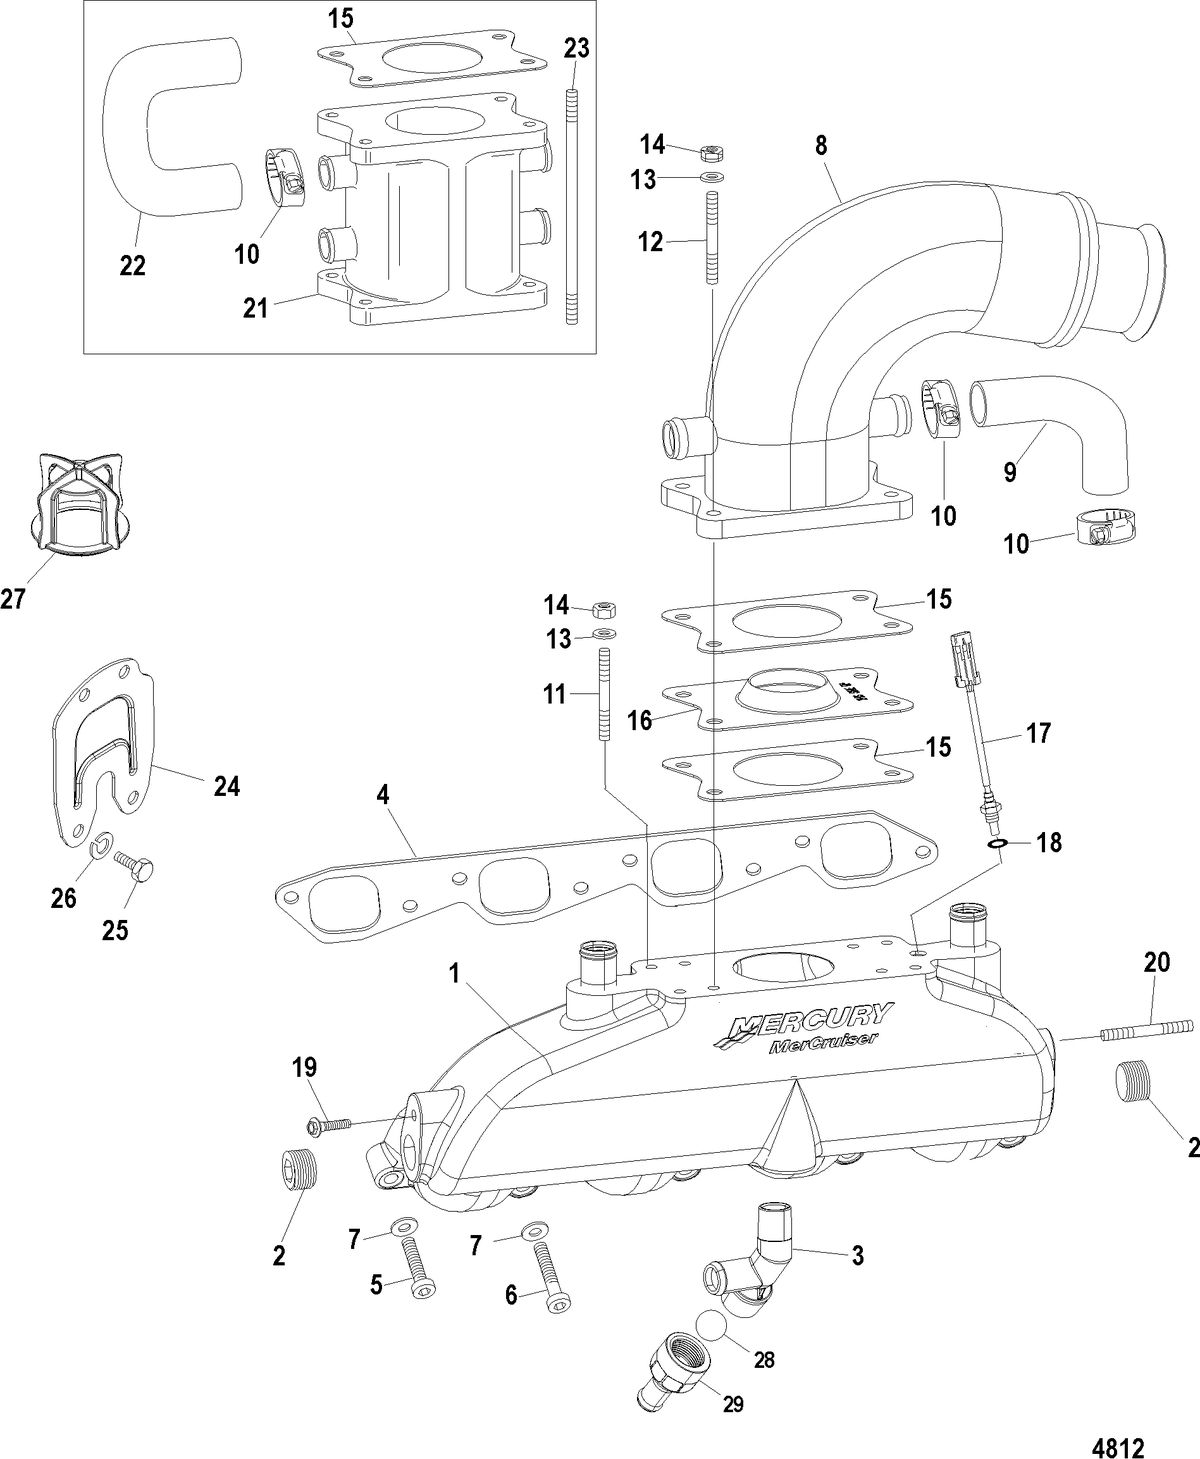 MERCRUISER 8.1L INBOARD EXHAUST MANIFOLD(W/O WATER RAIL), ELBOW, AND RISER